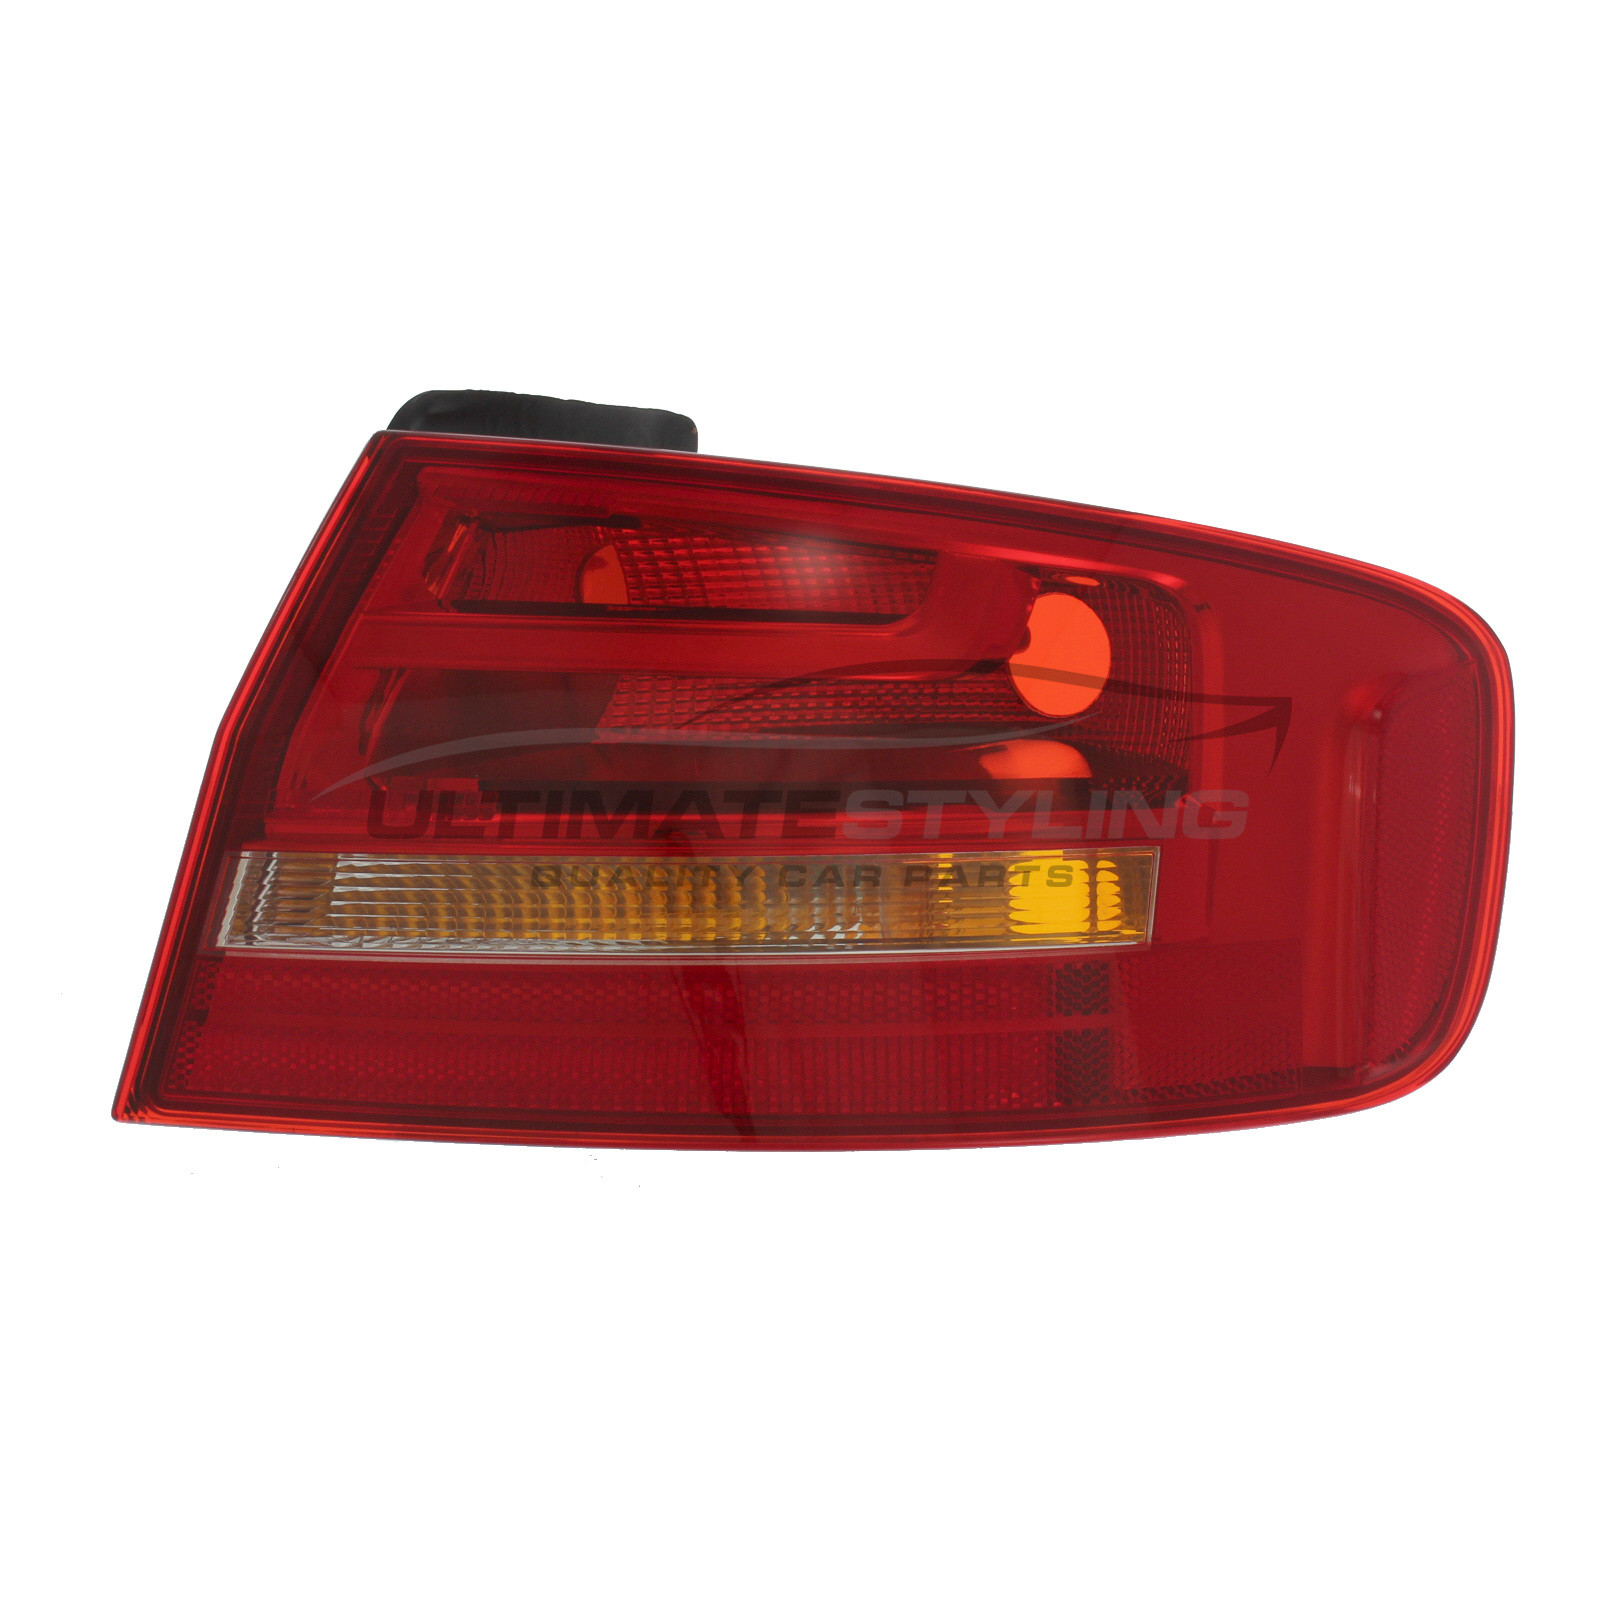 Audi A4 2011-2016 Non-LED Outer (Wing) Rear Light / Tail Light Excluding Bulb Holder Drivers Side (RH)